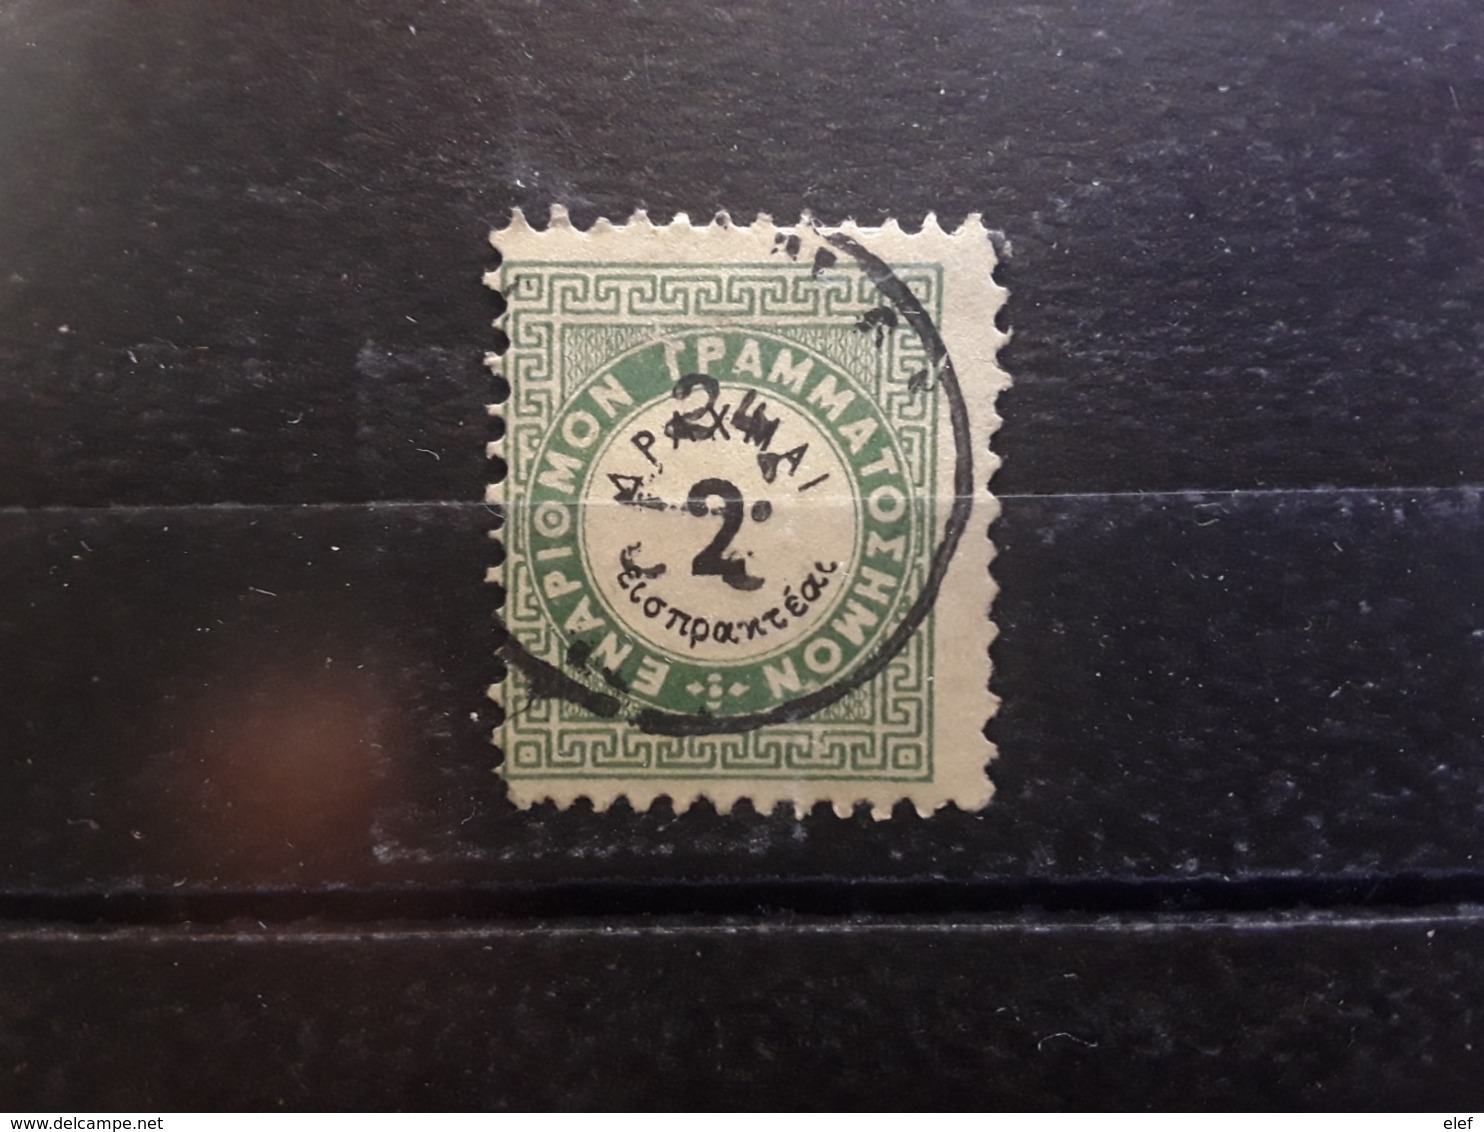 GRECE / GREECE Postage Due Taxe 1875 Yvert No 12 A, 2 D Vert Dentele 10 1/2, Obl TB - Used Stamps